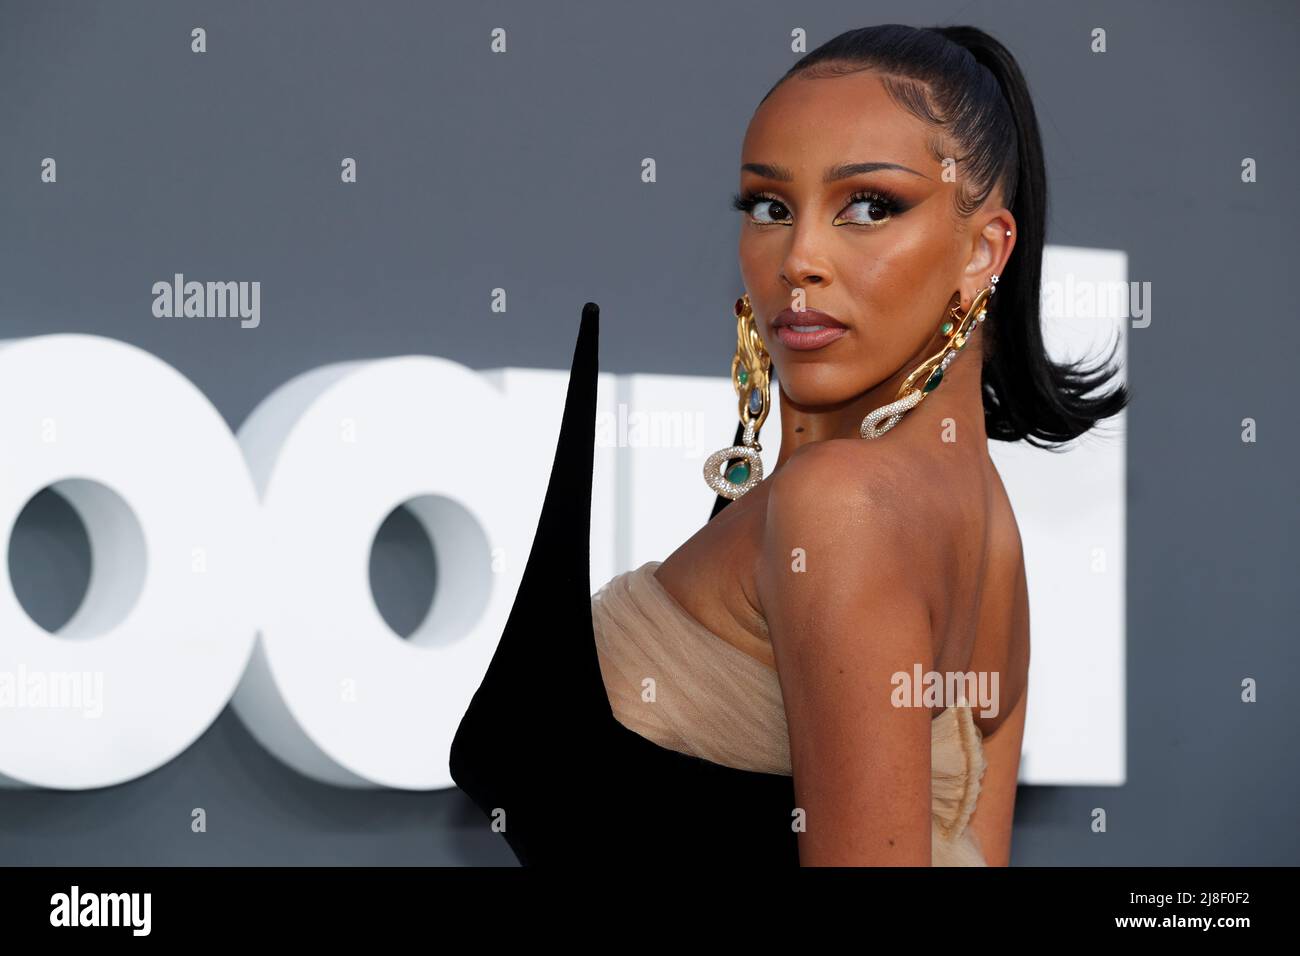 Doja Cat arrives to attend the 2022 Billboard Music Awards at MGM Grand Garden Arena in Las Vegas, Nevada, U.S. May 15, 2022. REUTERS/Steve Marcus Stock Photo